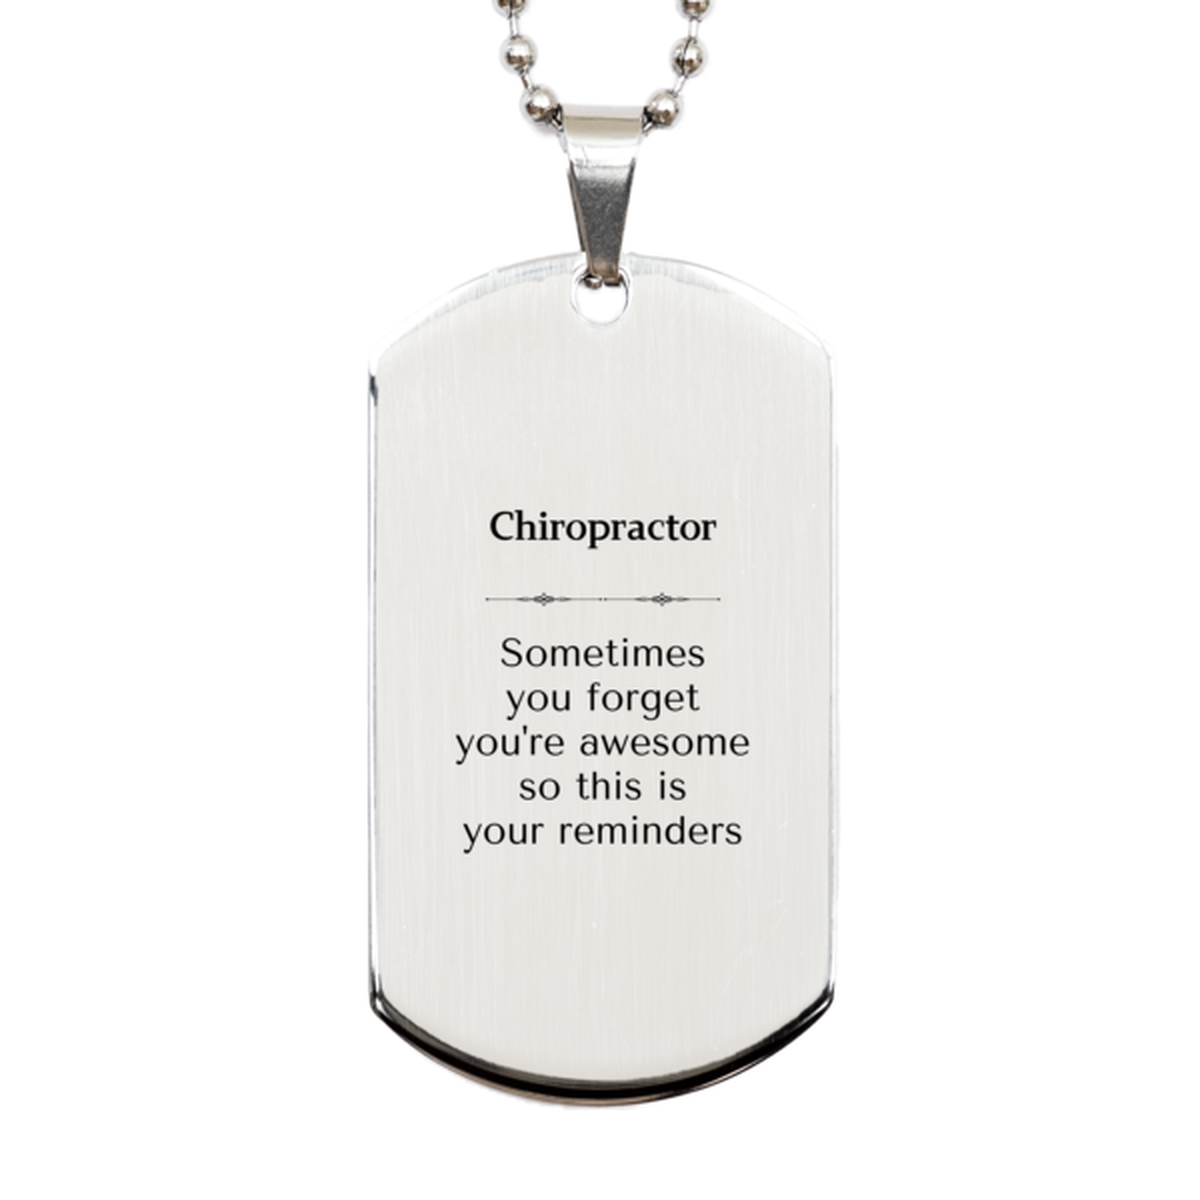 Sentimental Chiropractor Silver Dog Tag, Chiropractor Sometimes you forget you're awesome so this is your reminders, Graduation Christmas Birthday Gifts for Chiropractor, Men, Women, Coworkers